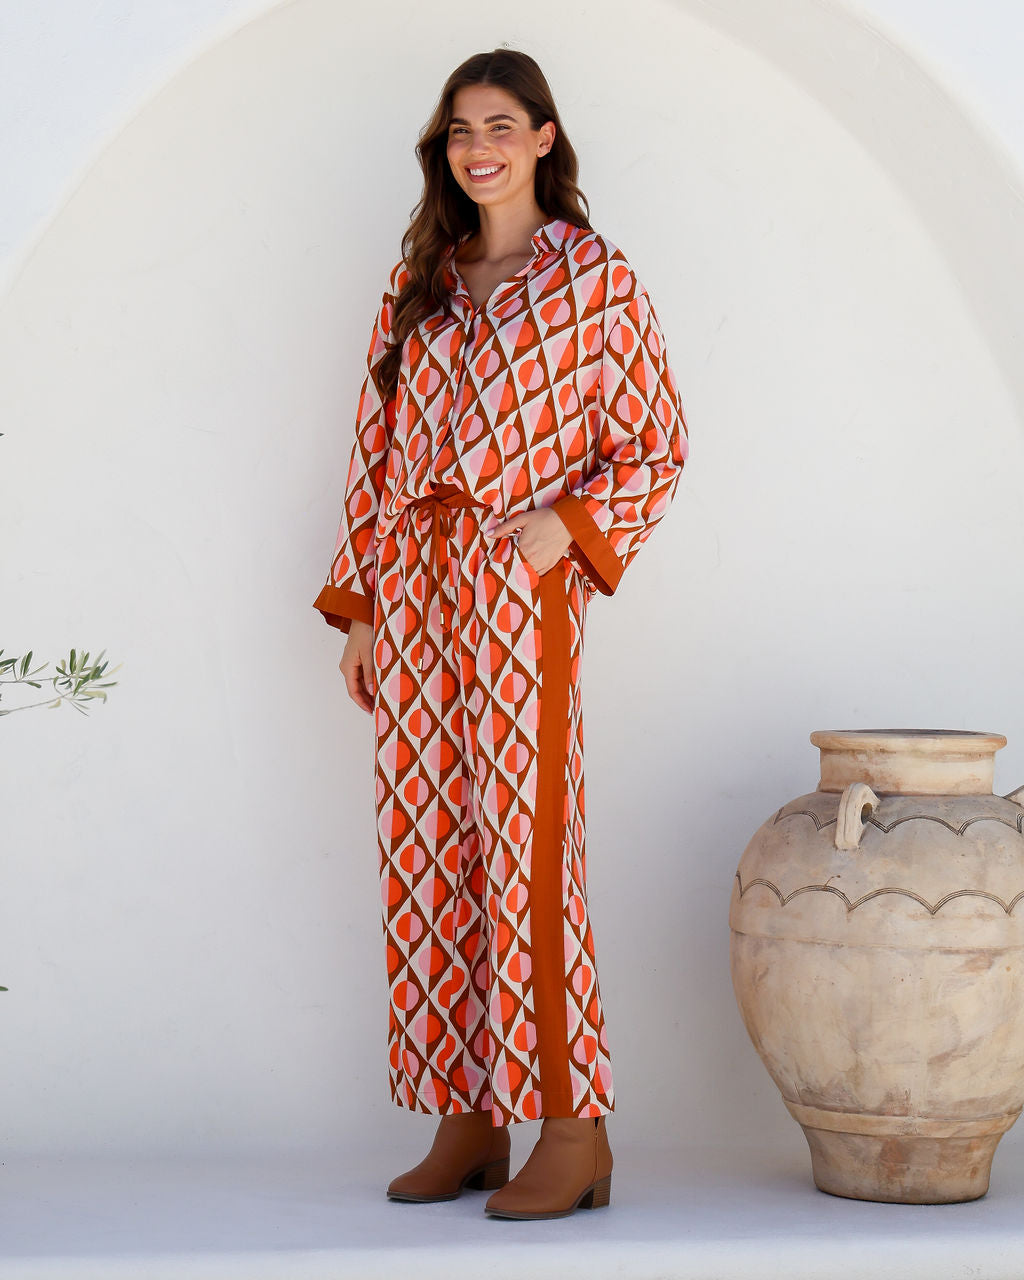 the arely pant by label of love are bright coloured pull on elastic waist pants in a geo print and contrast stripe down the side and part of a matching pant set